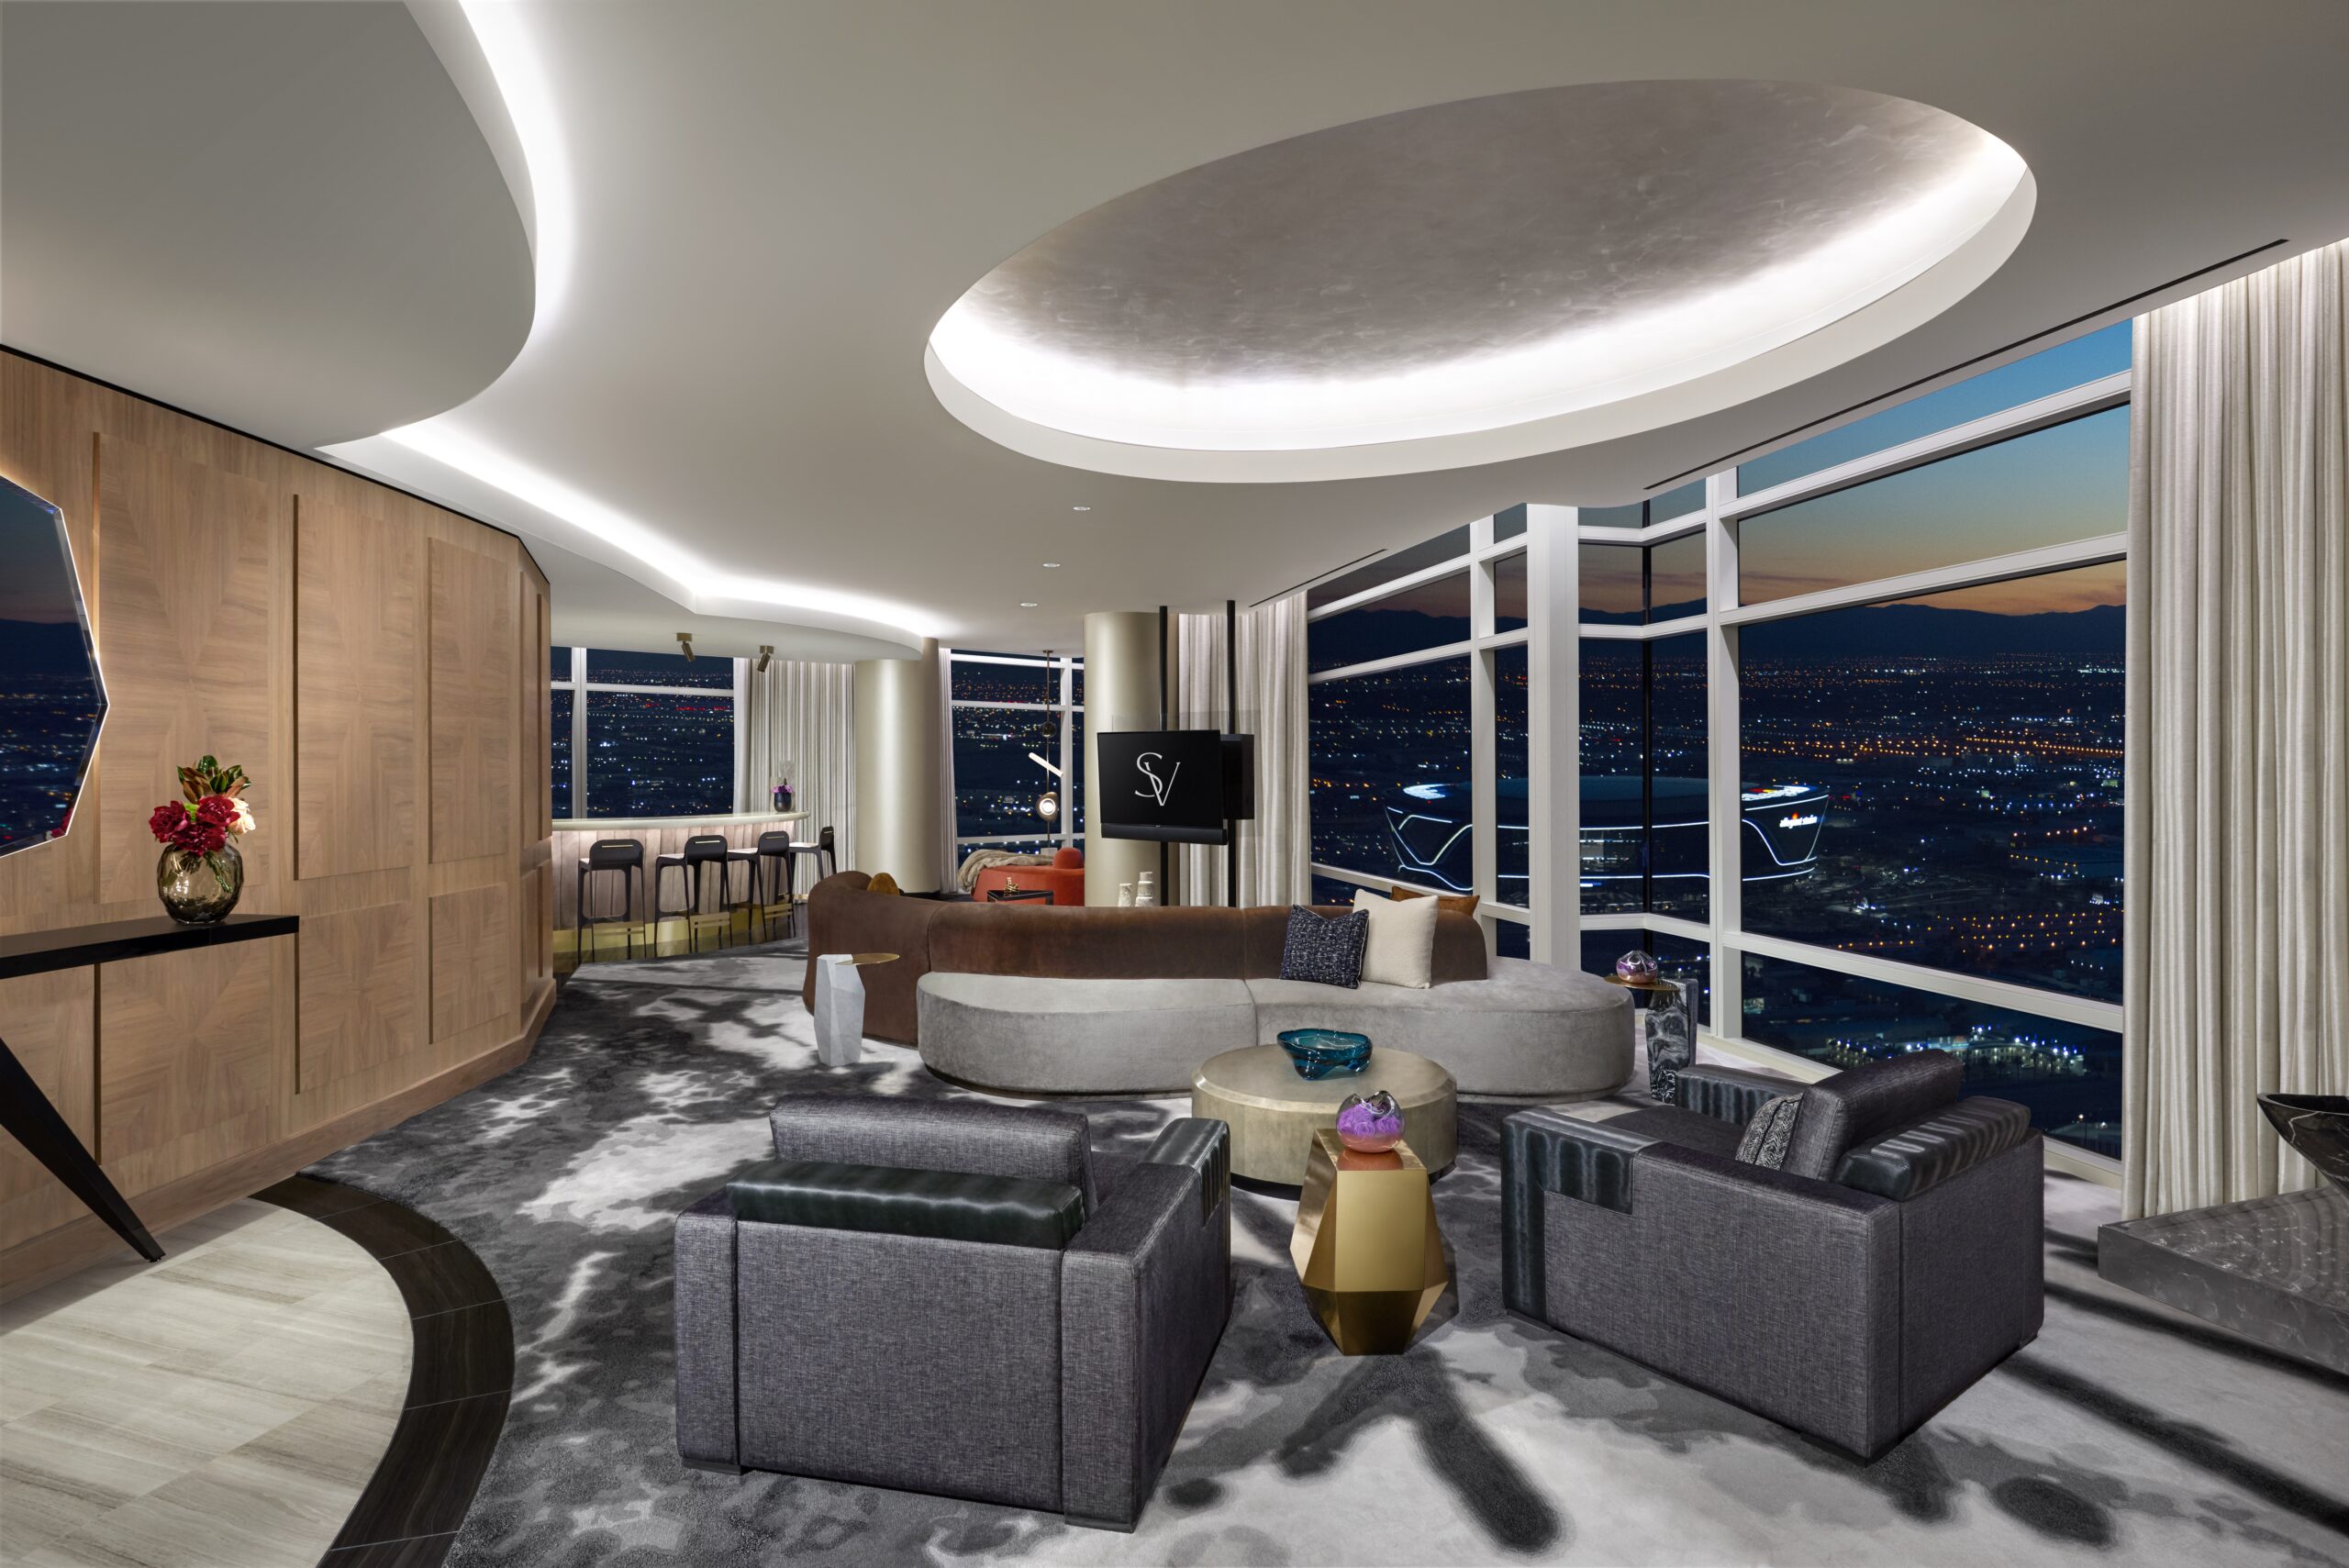 Rendering of the living room in Skyvilla at ARIA Resort & Casino. Its gaming and meeting options are extensive. The room has floor-to-ceiling windows, grey armchairs and patterned carpet.